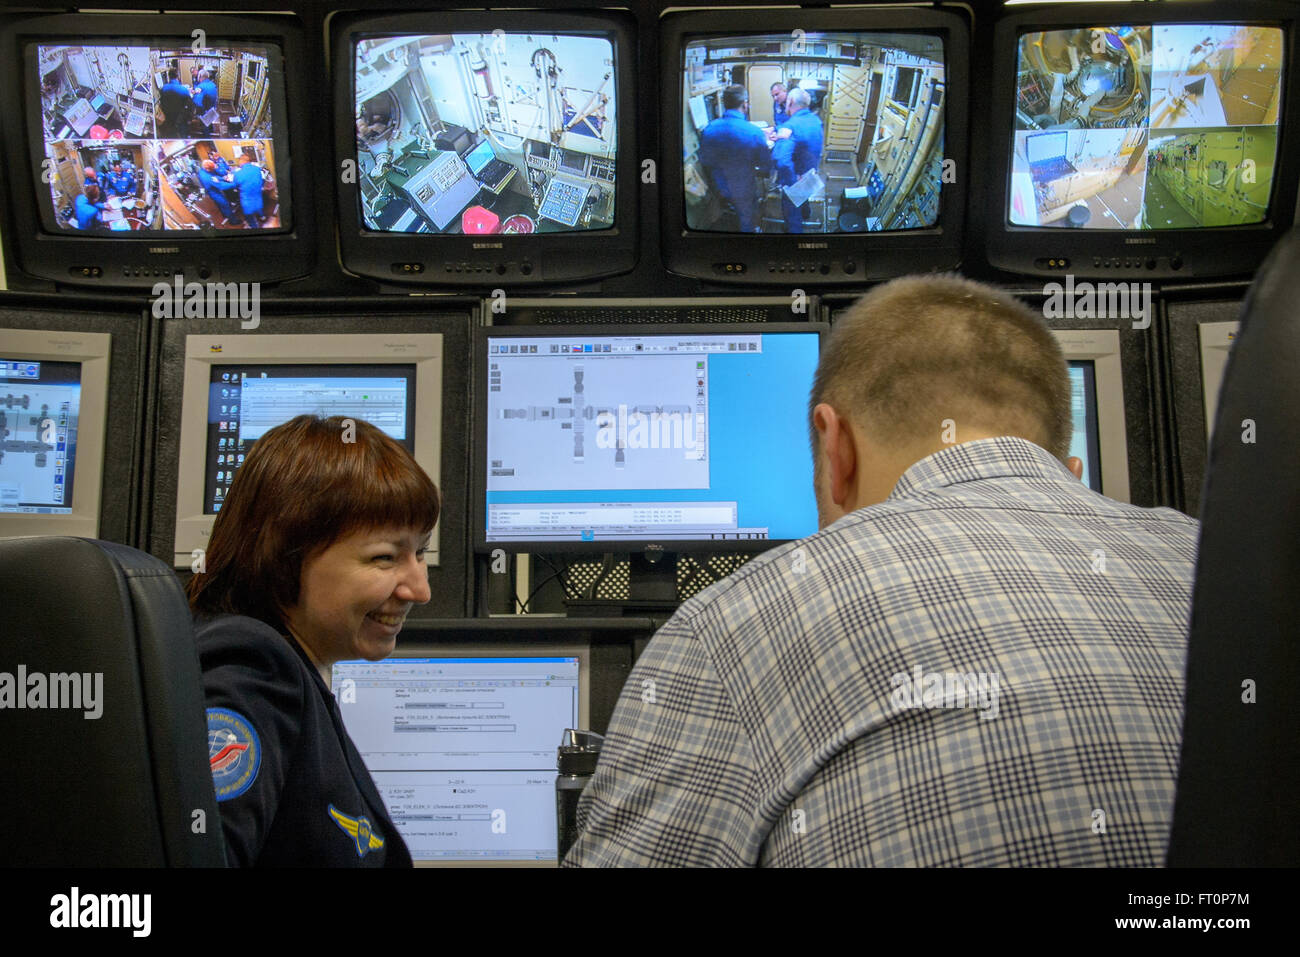 Expedition 47 crew members: NASA astronaut Jeff Williams, Russian cosmonauts Oleg Skripochka and Alexei Ovchinin of Roscosmos are seen on monitors in a control room as they participate in their first day of qualification exams, Wednesday, Feb. 24, 2016, at the Gagarin Cosmonaut Training Center (GCTC) in Star City, Russia. Stock Photo